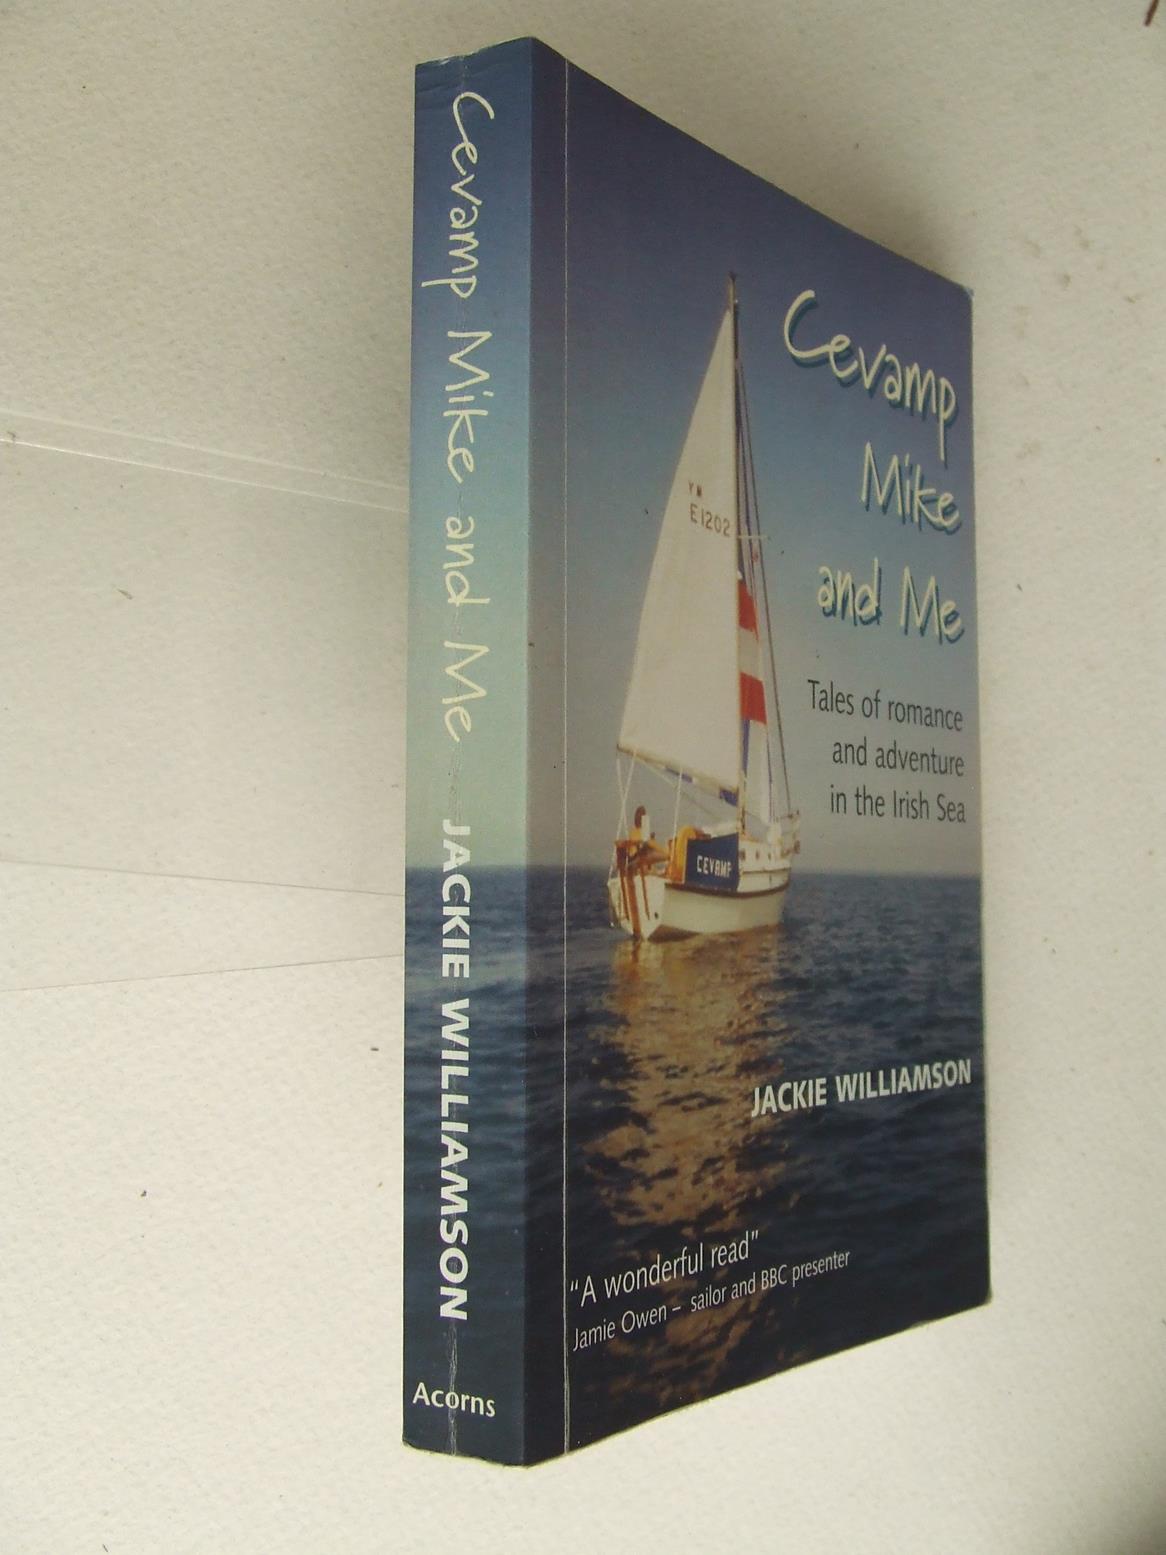 Cevamp, Mike and Me, tales of romance and adventure in the Irish Sea